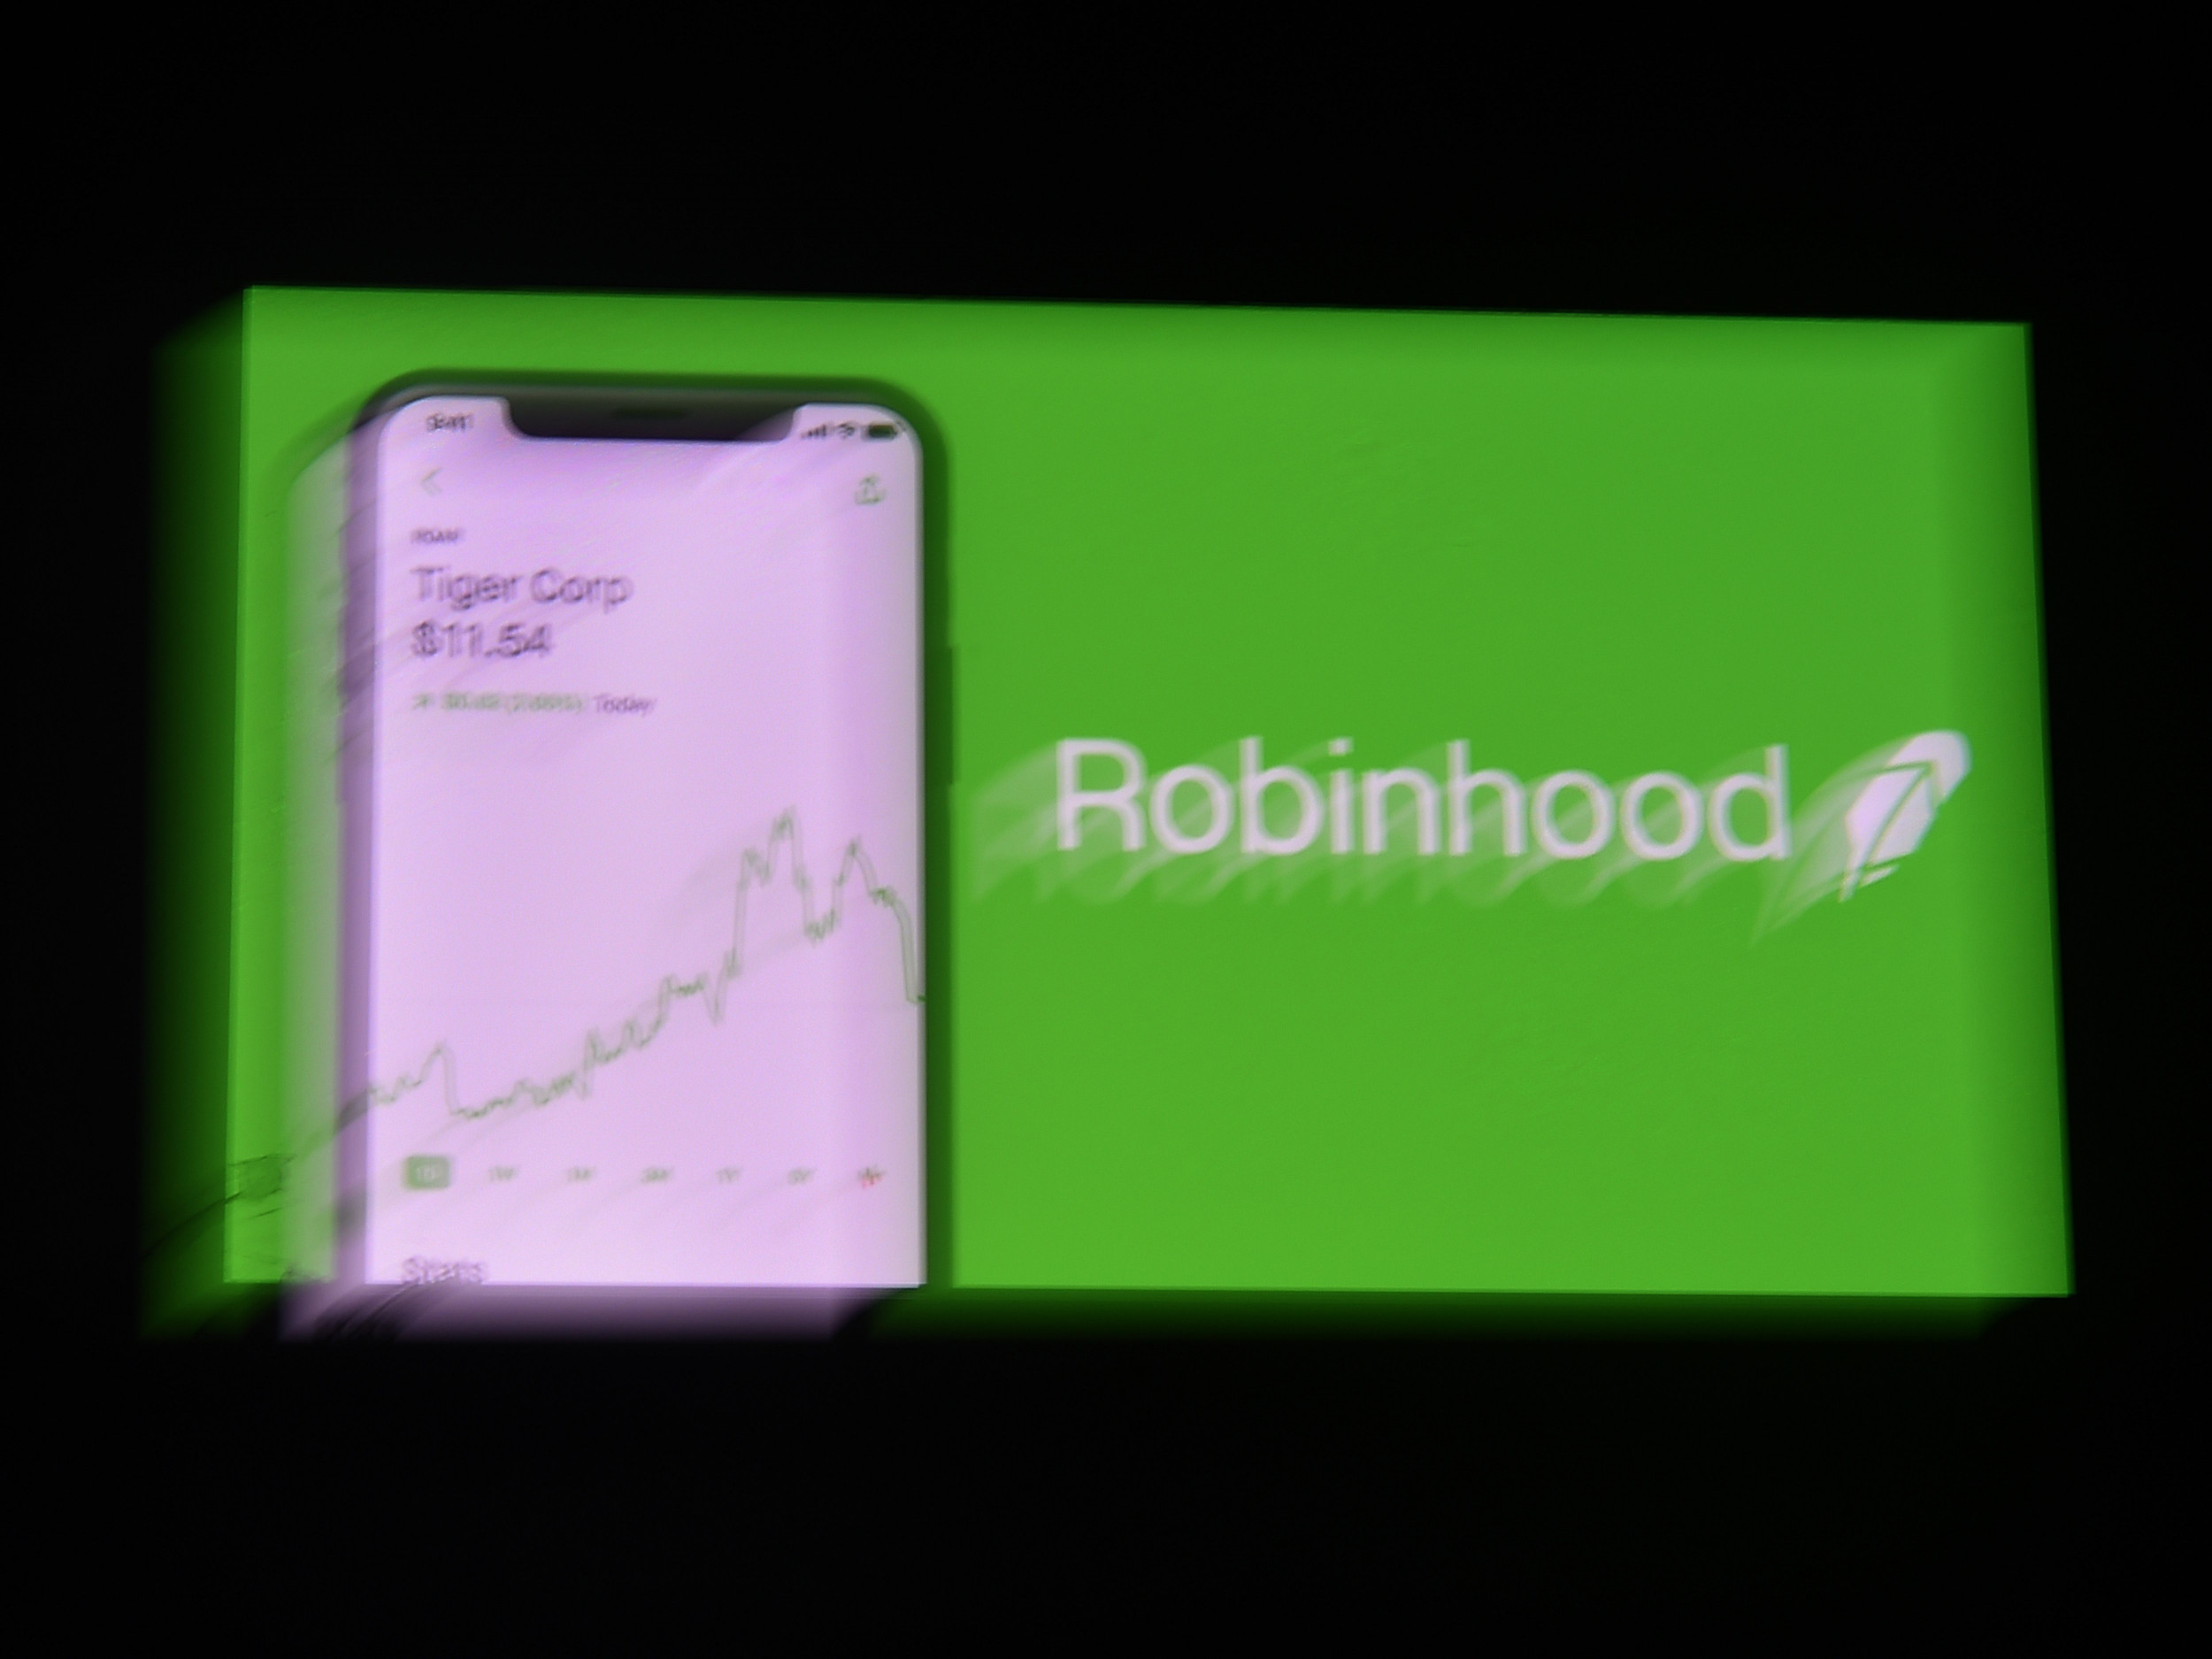 A Message from our CEO and Co-Founder Vlad Tenev - Robinhood Newsroom